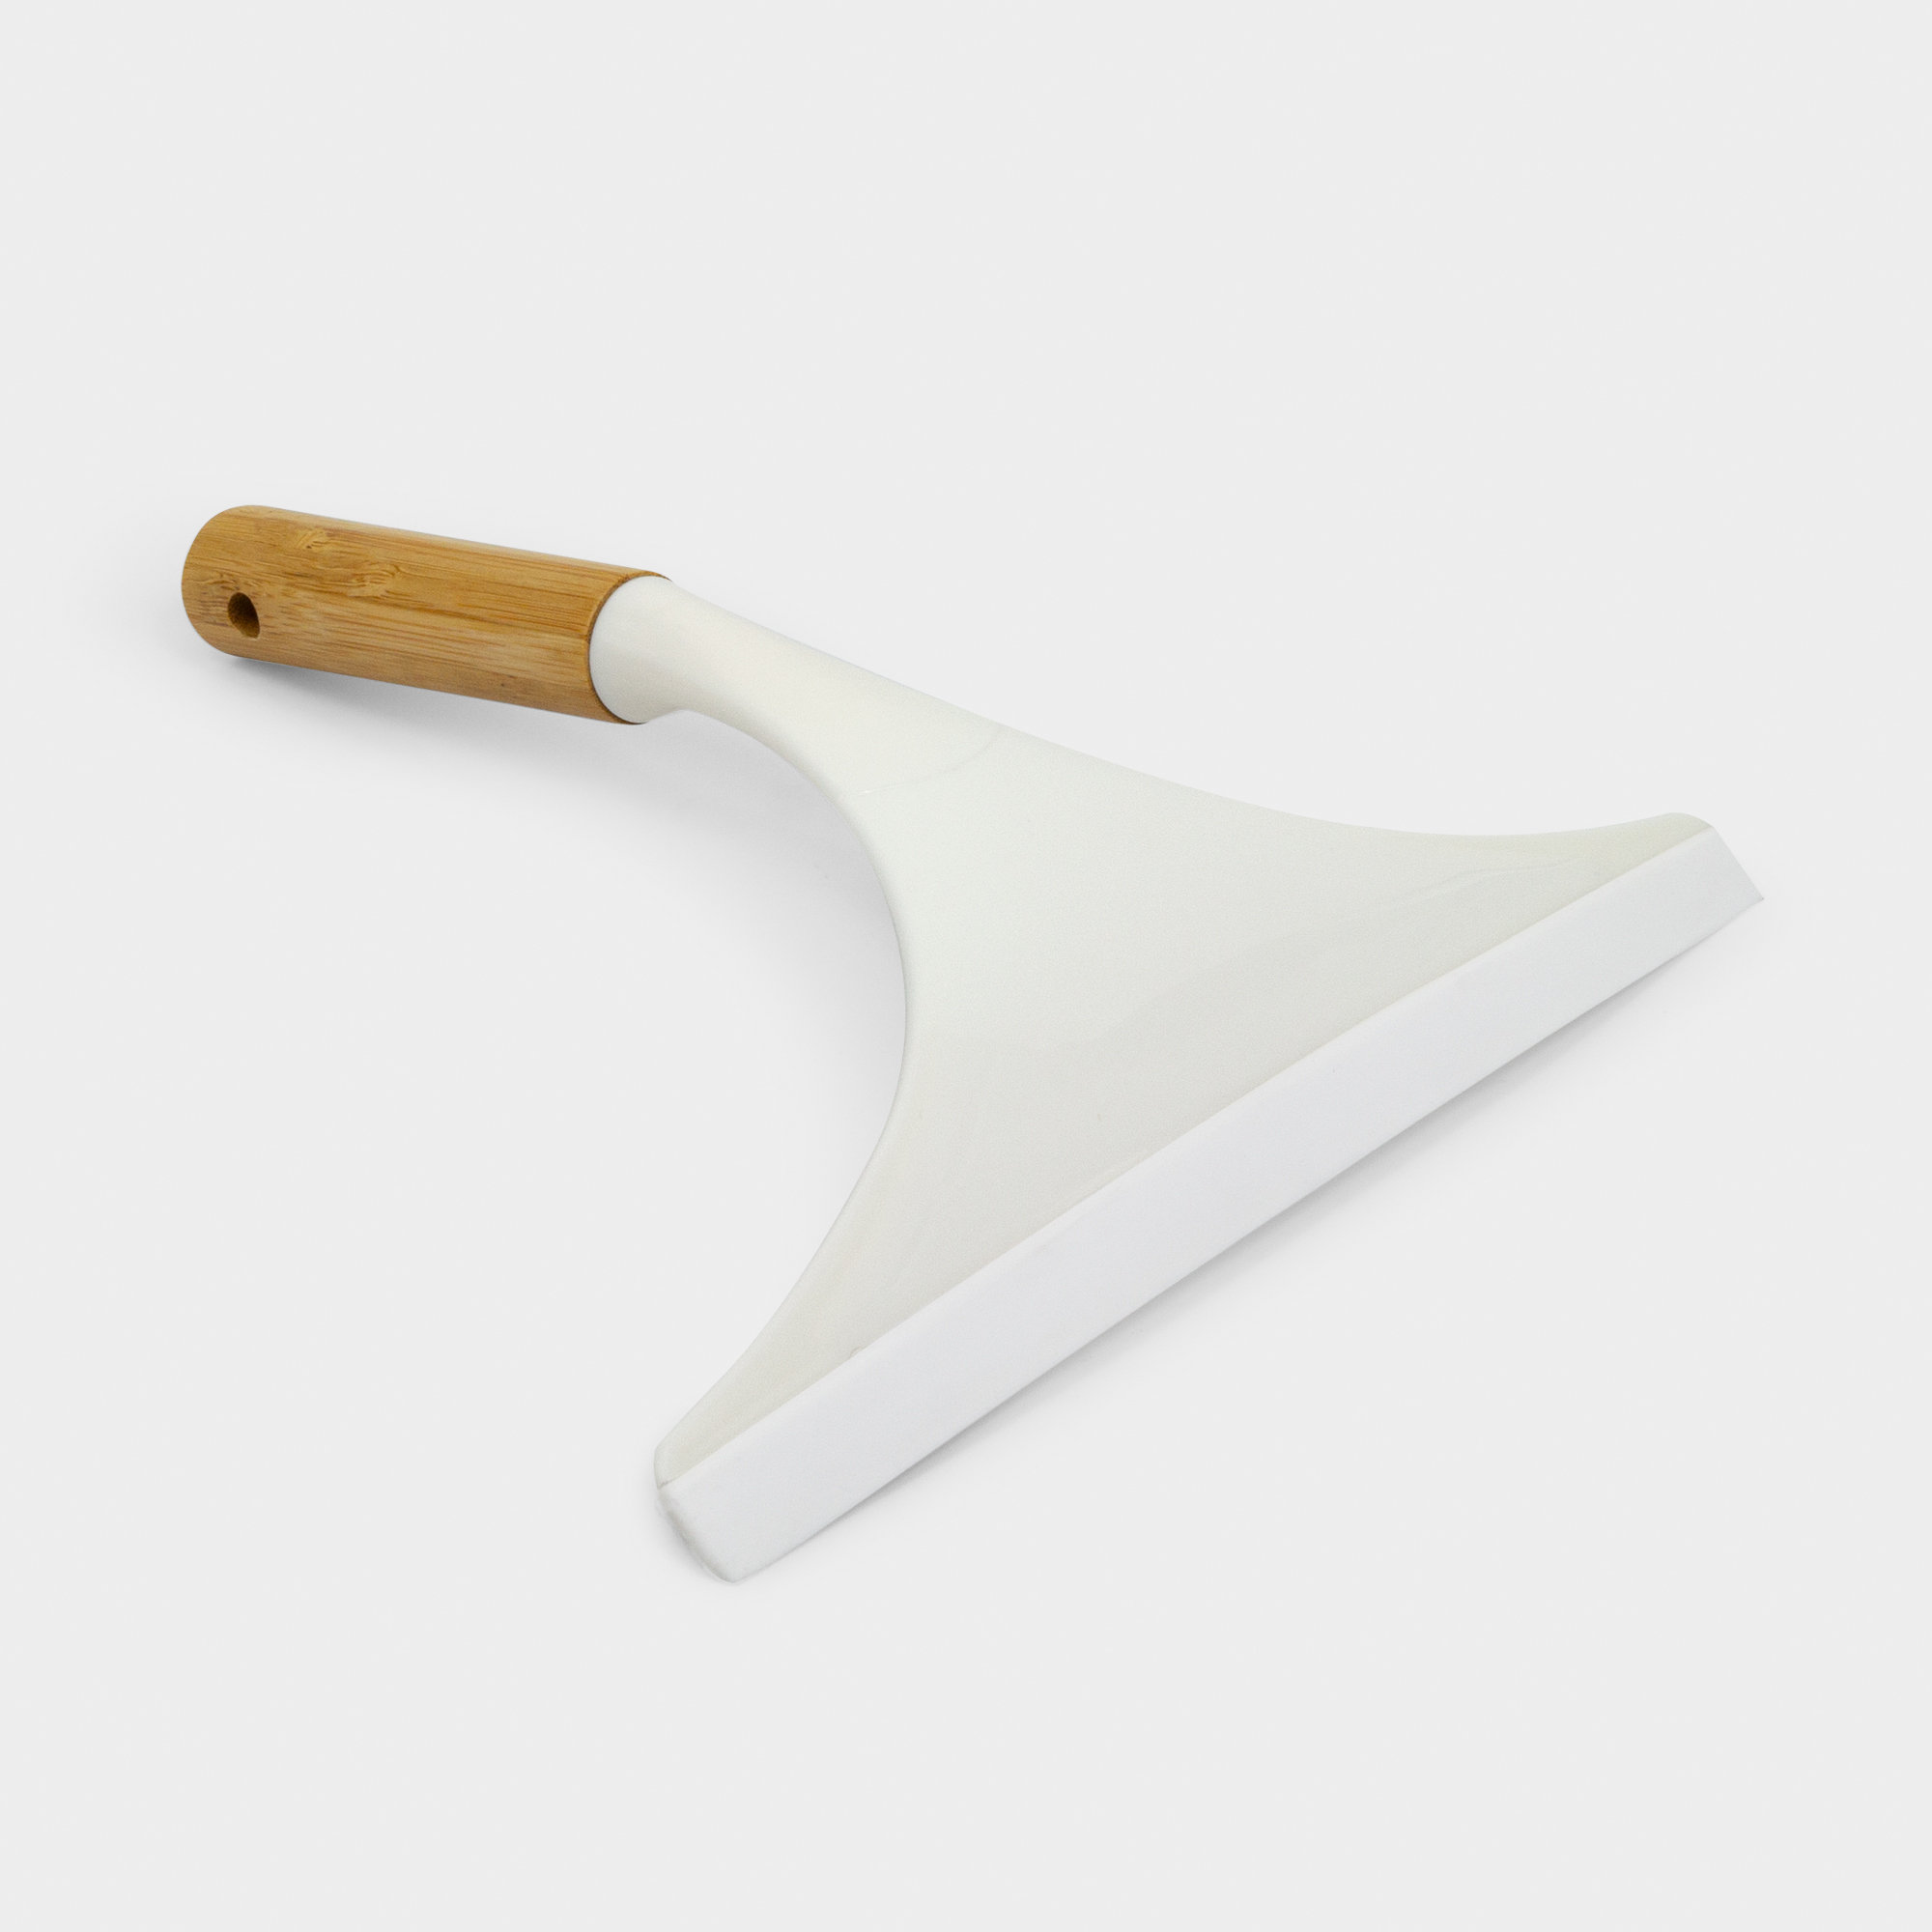 Rebrilliant Griffithville Hanging Squeegee & Reviews